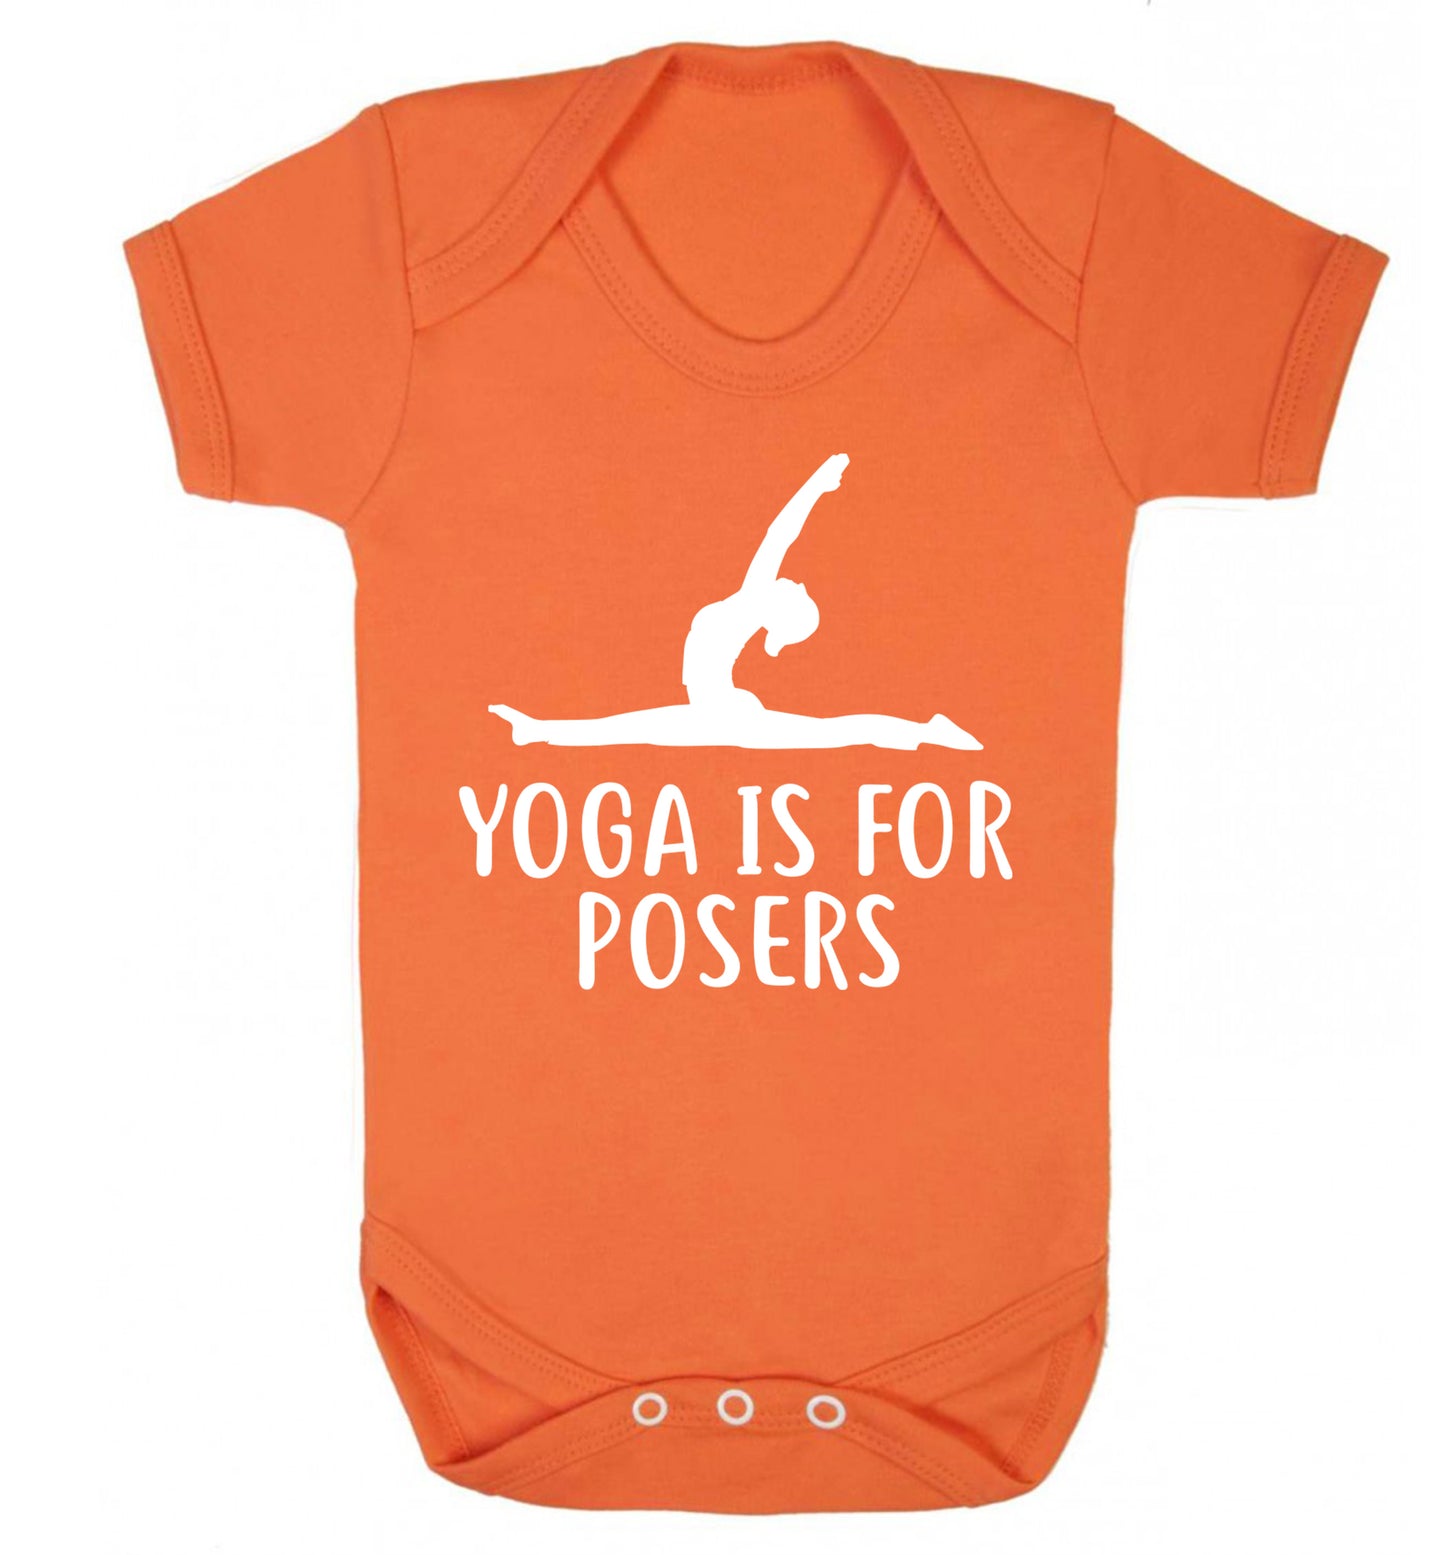 Yoga is for posers Baby Vest orange 18-24 months